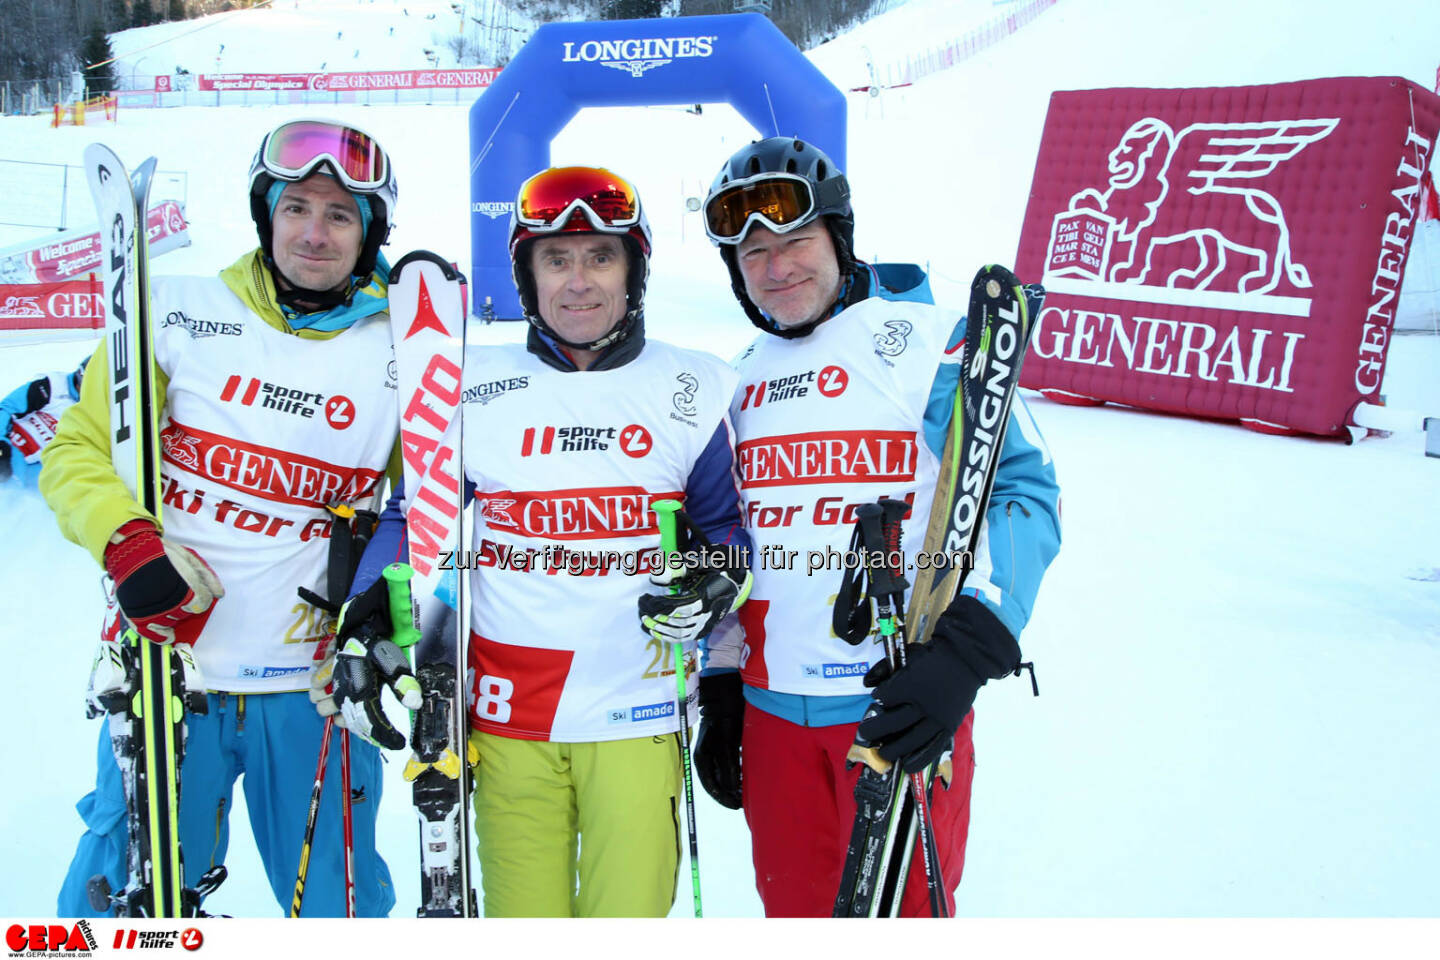 Ski for Gold Charity Race. Image shows Wolfgang Schreder, Karl Obauer and Christoph Sauermann. Photo: GEPA pictures/ Harald Steiner